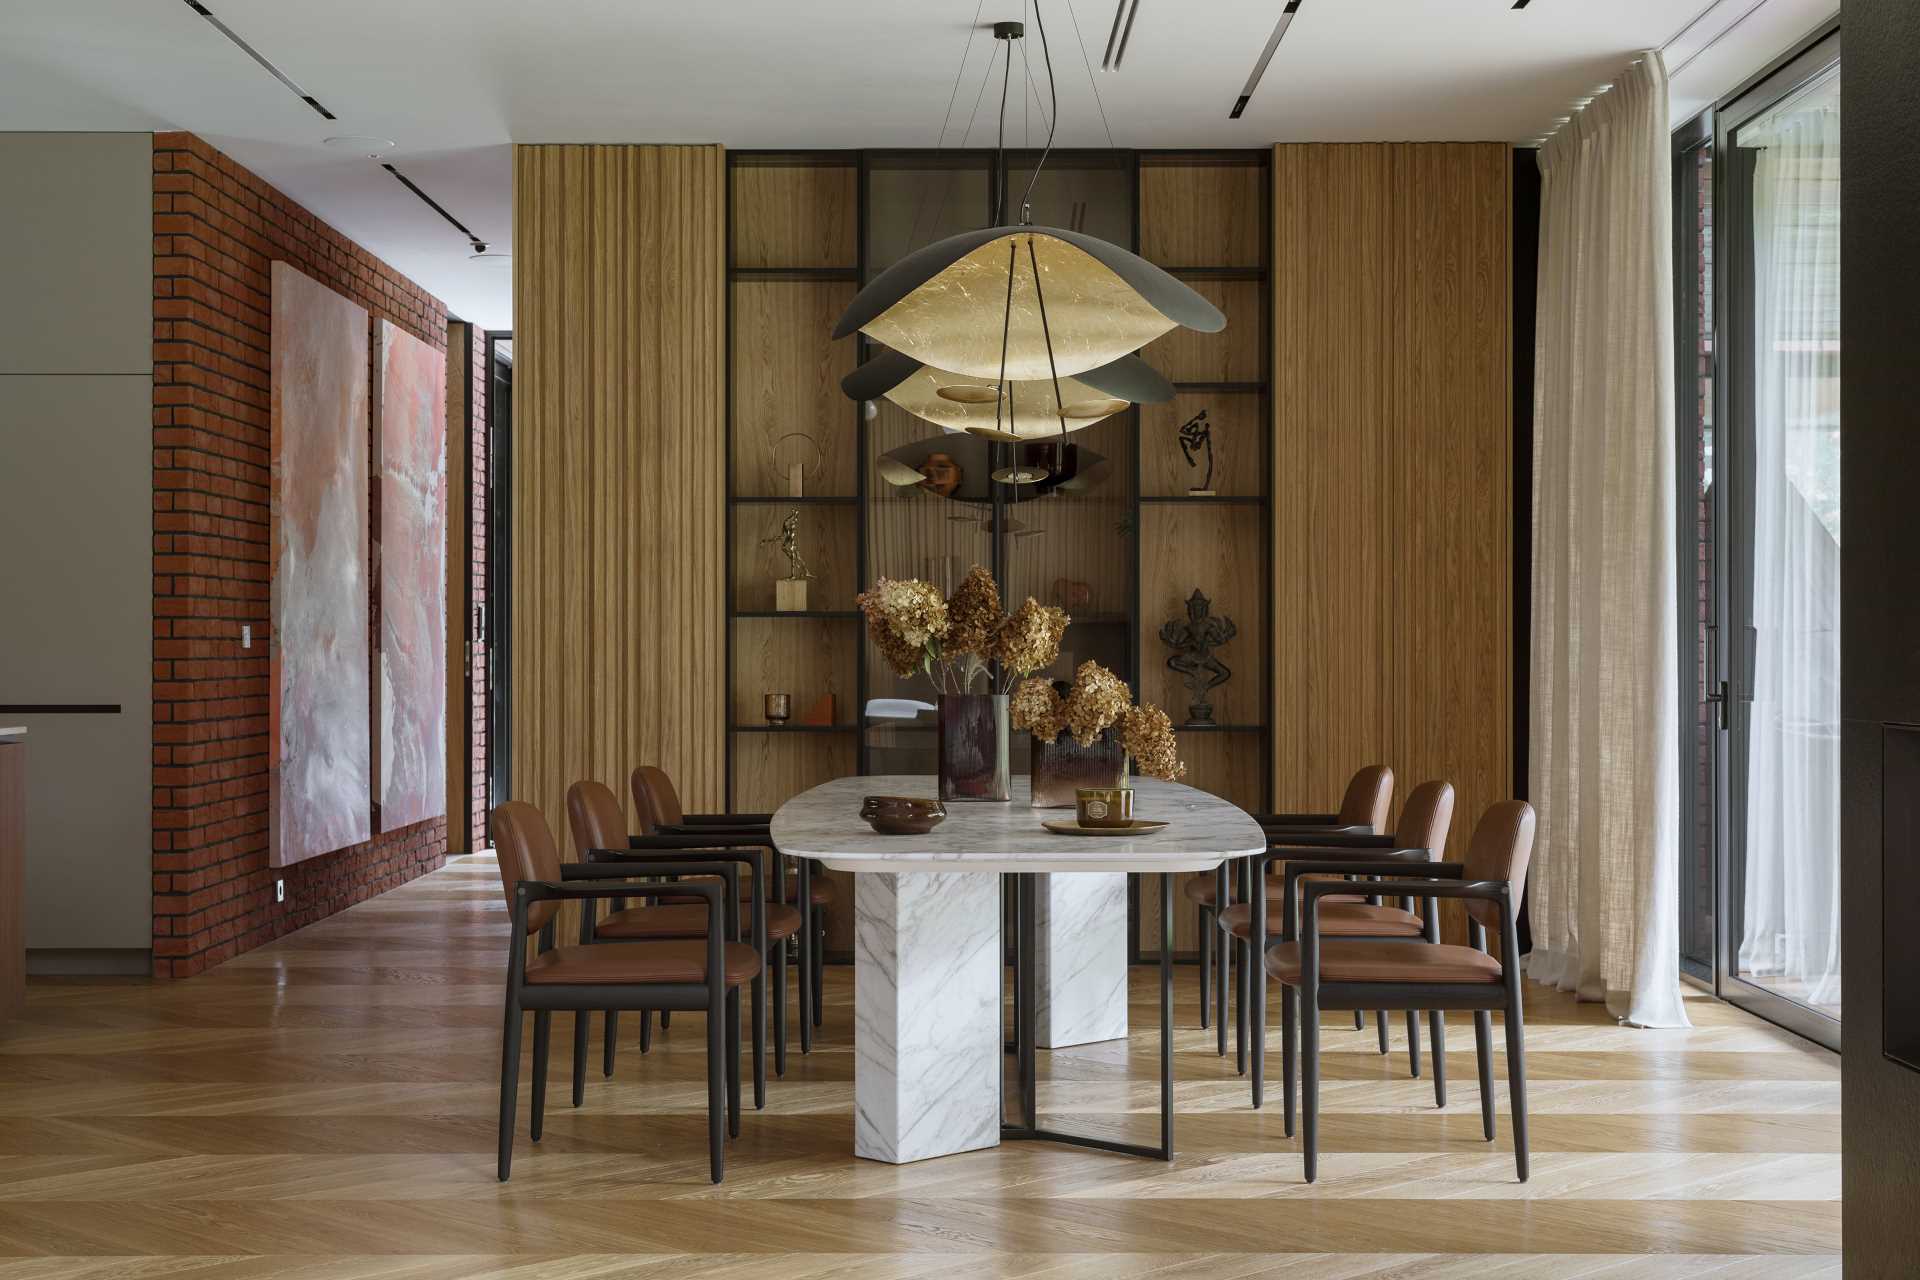 Aged brick, black steel, and corten-color elements appear inside this modern ،use, like in the dining room.